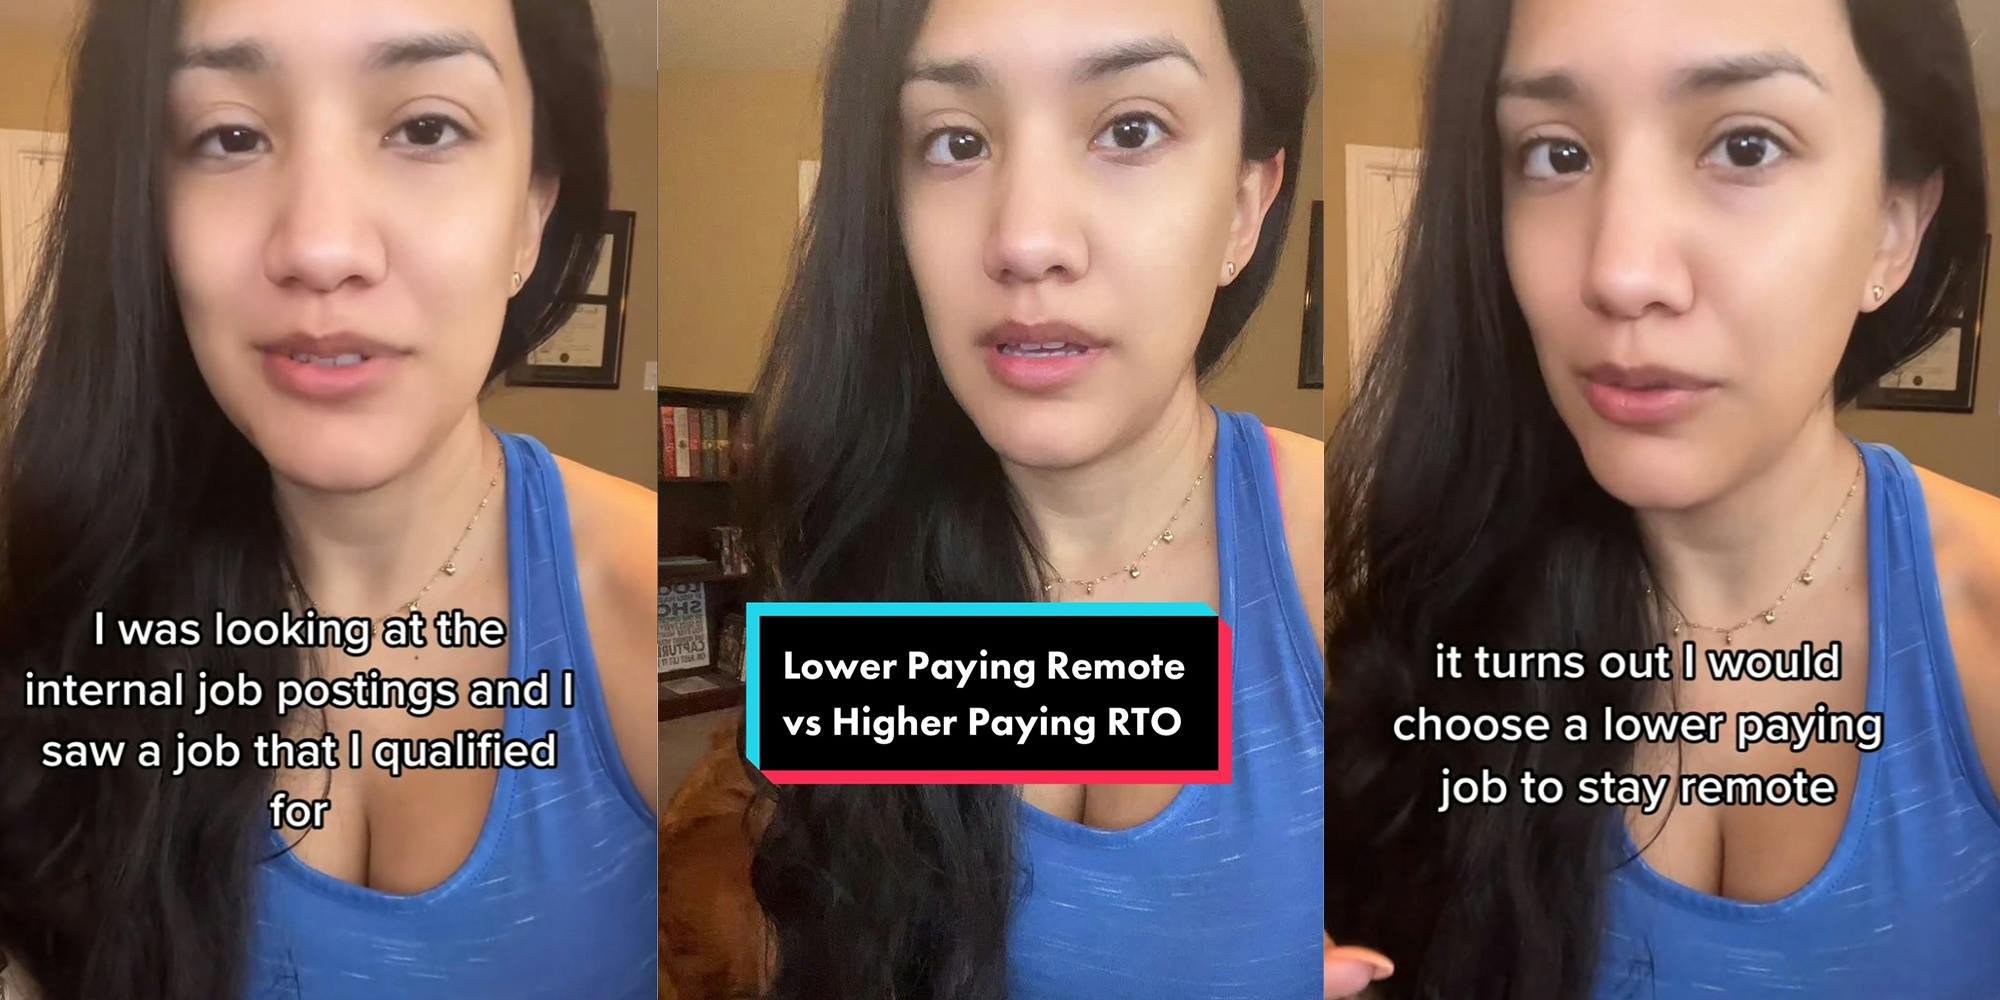 'I don't care if that makes me a job hopper': Viewers defend worker who chooses WFH job over RTO promotion that pays more